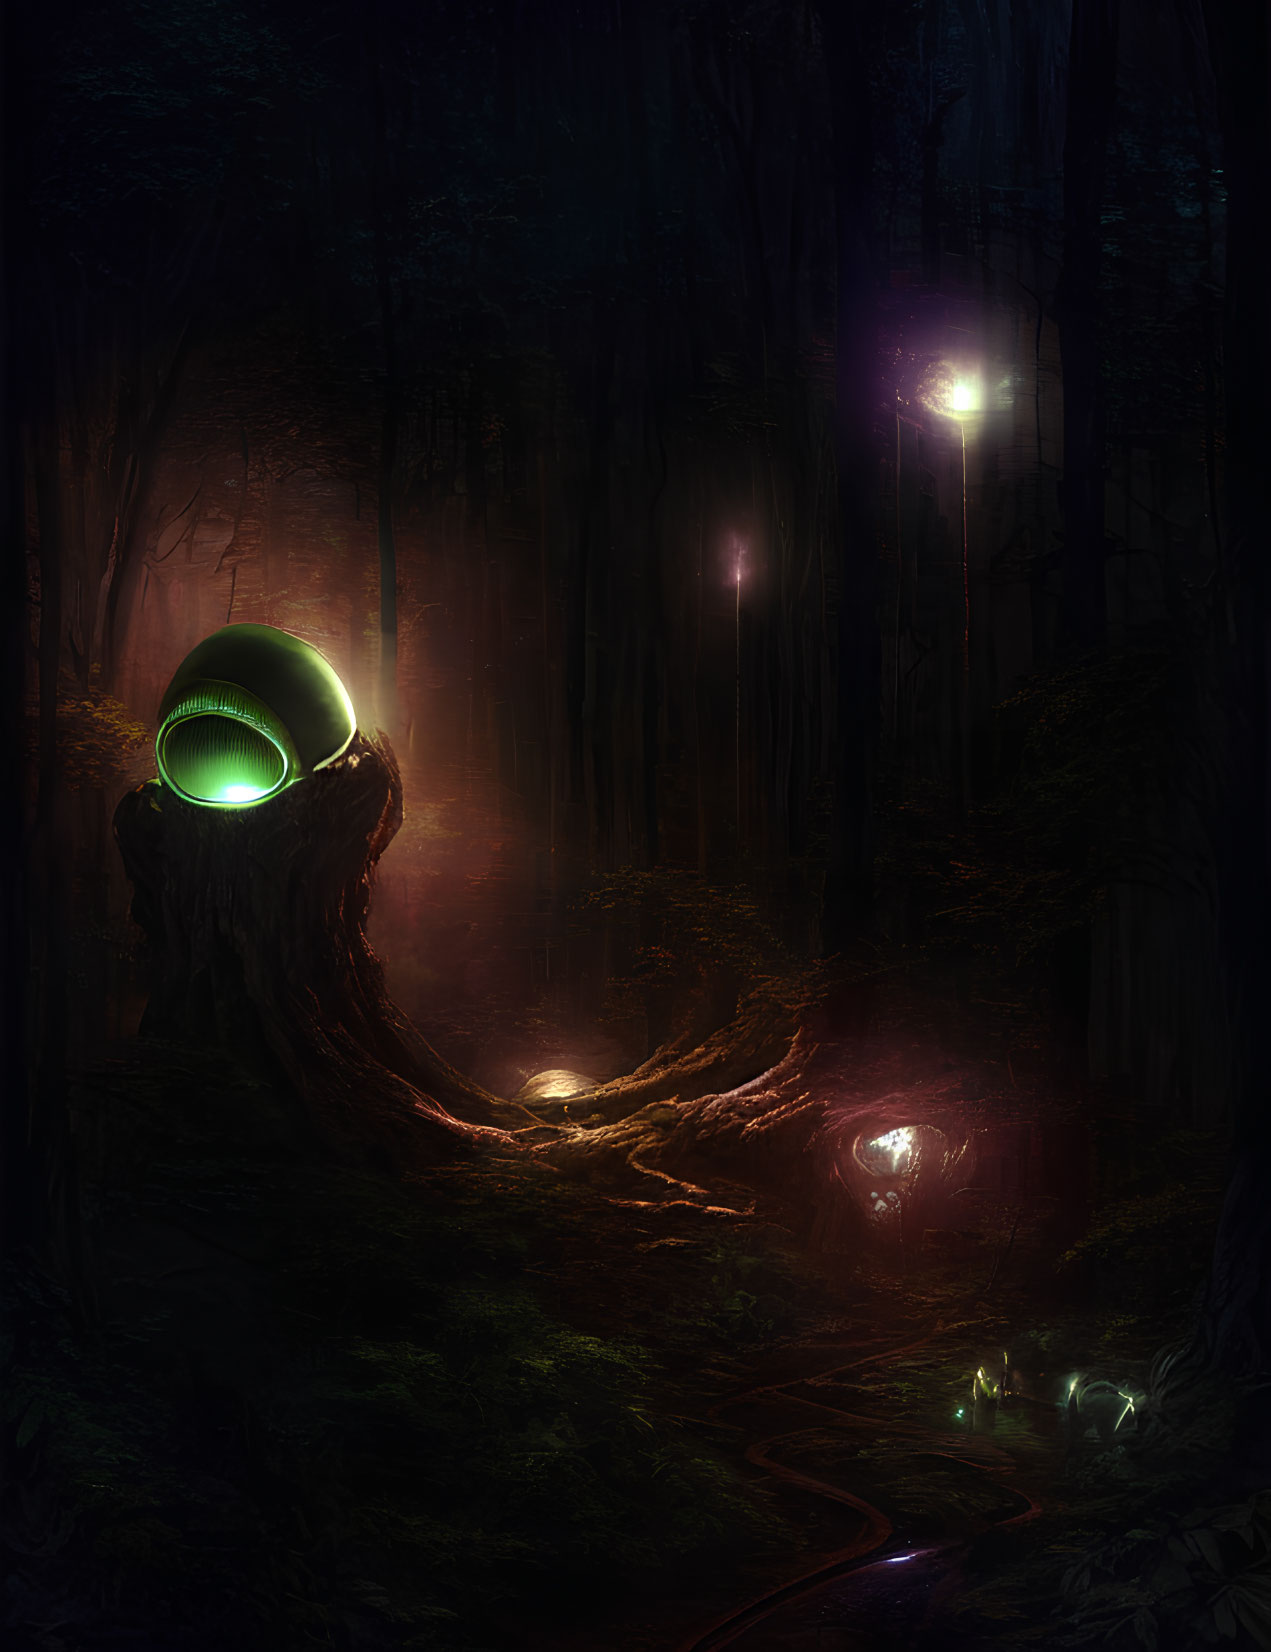 Mystical forest at night with glowing bioluminescent plants and pod-like structure